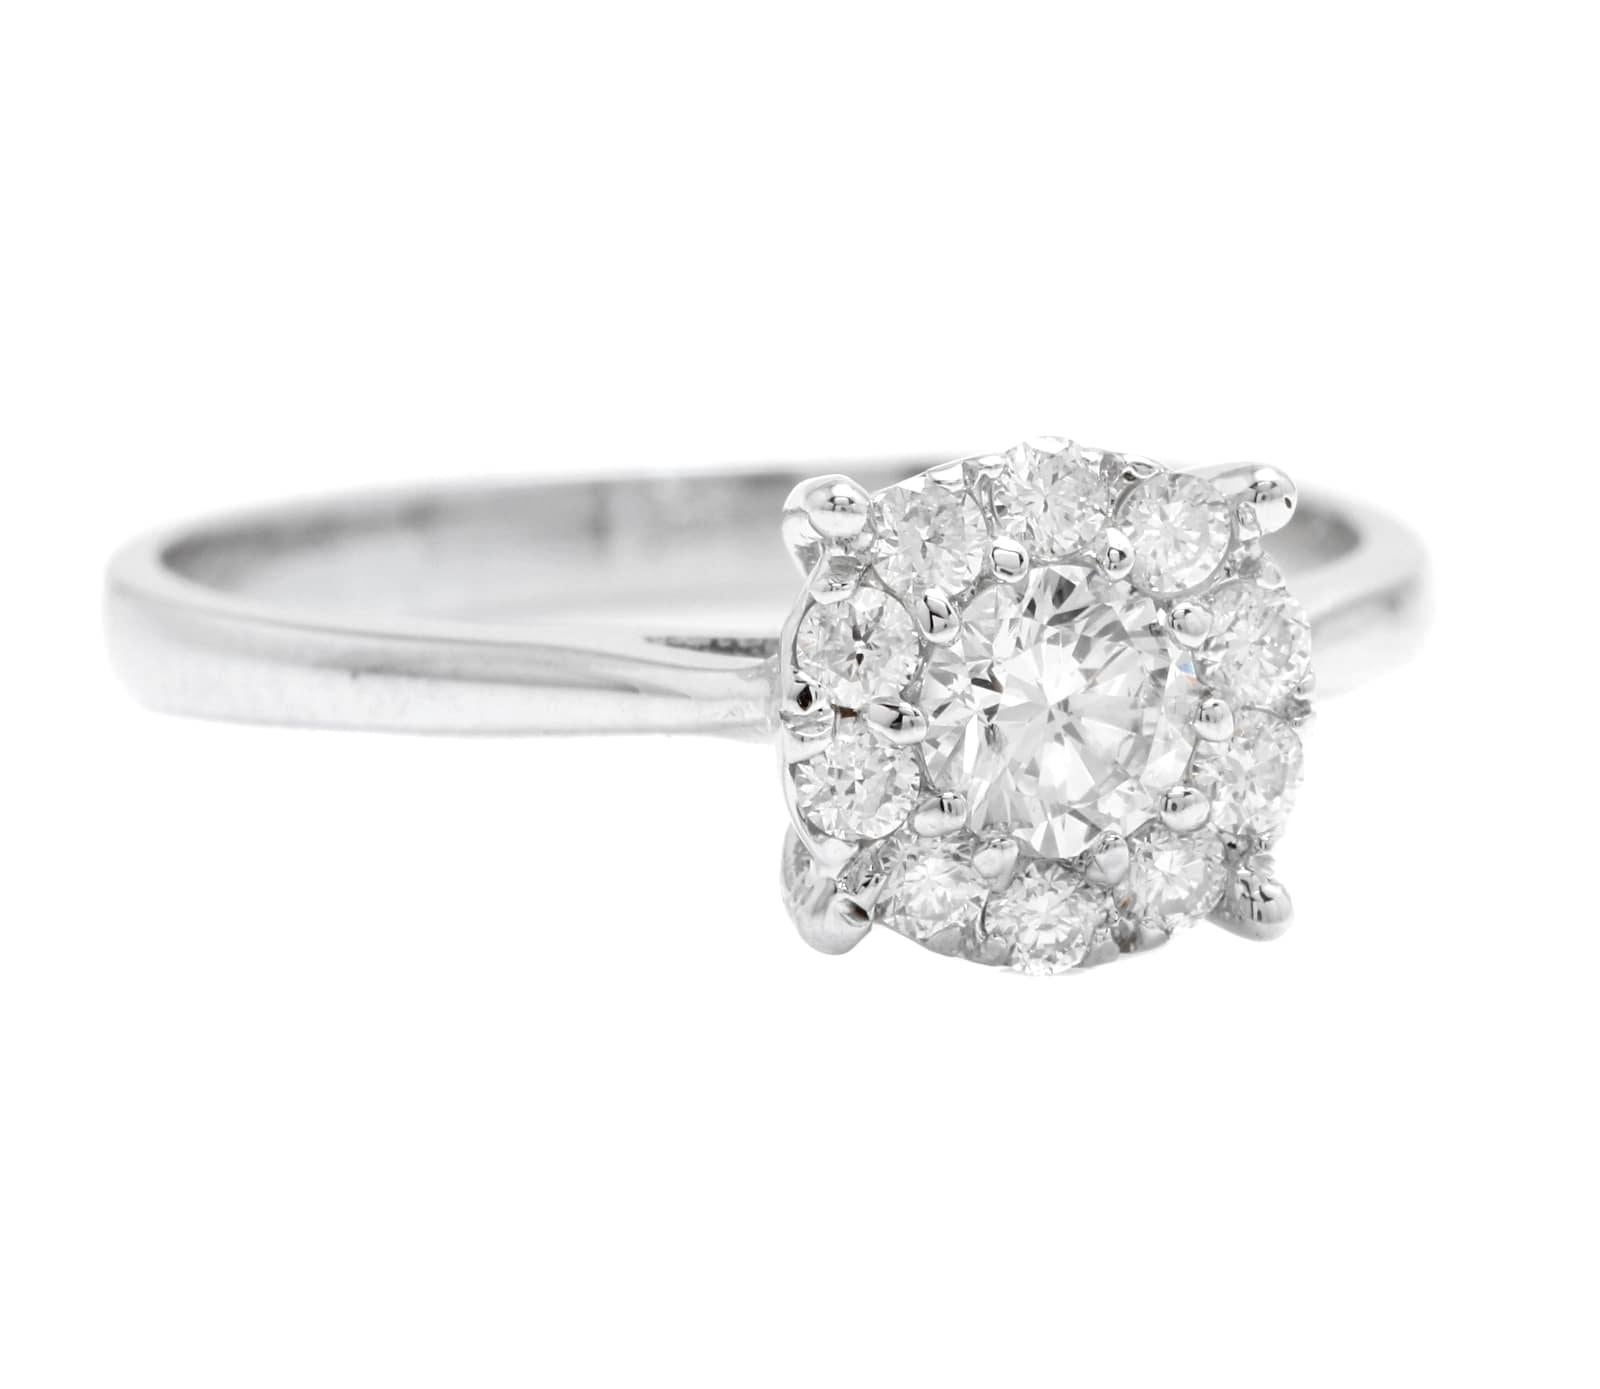 Splendid 0.45 Carats Natural Diamond 18K Solid White Gold Band Ring

Suggested Replacement Value: Approx. $3,800.00

Stamped: 18K

Total Natural Round Cut Diamonds Weight: Approx. 0.45 Carats (color G-H / Clarity SI1-SI2)

Center Diamond is Approx.